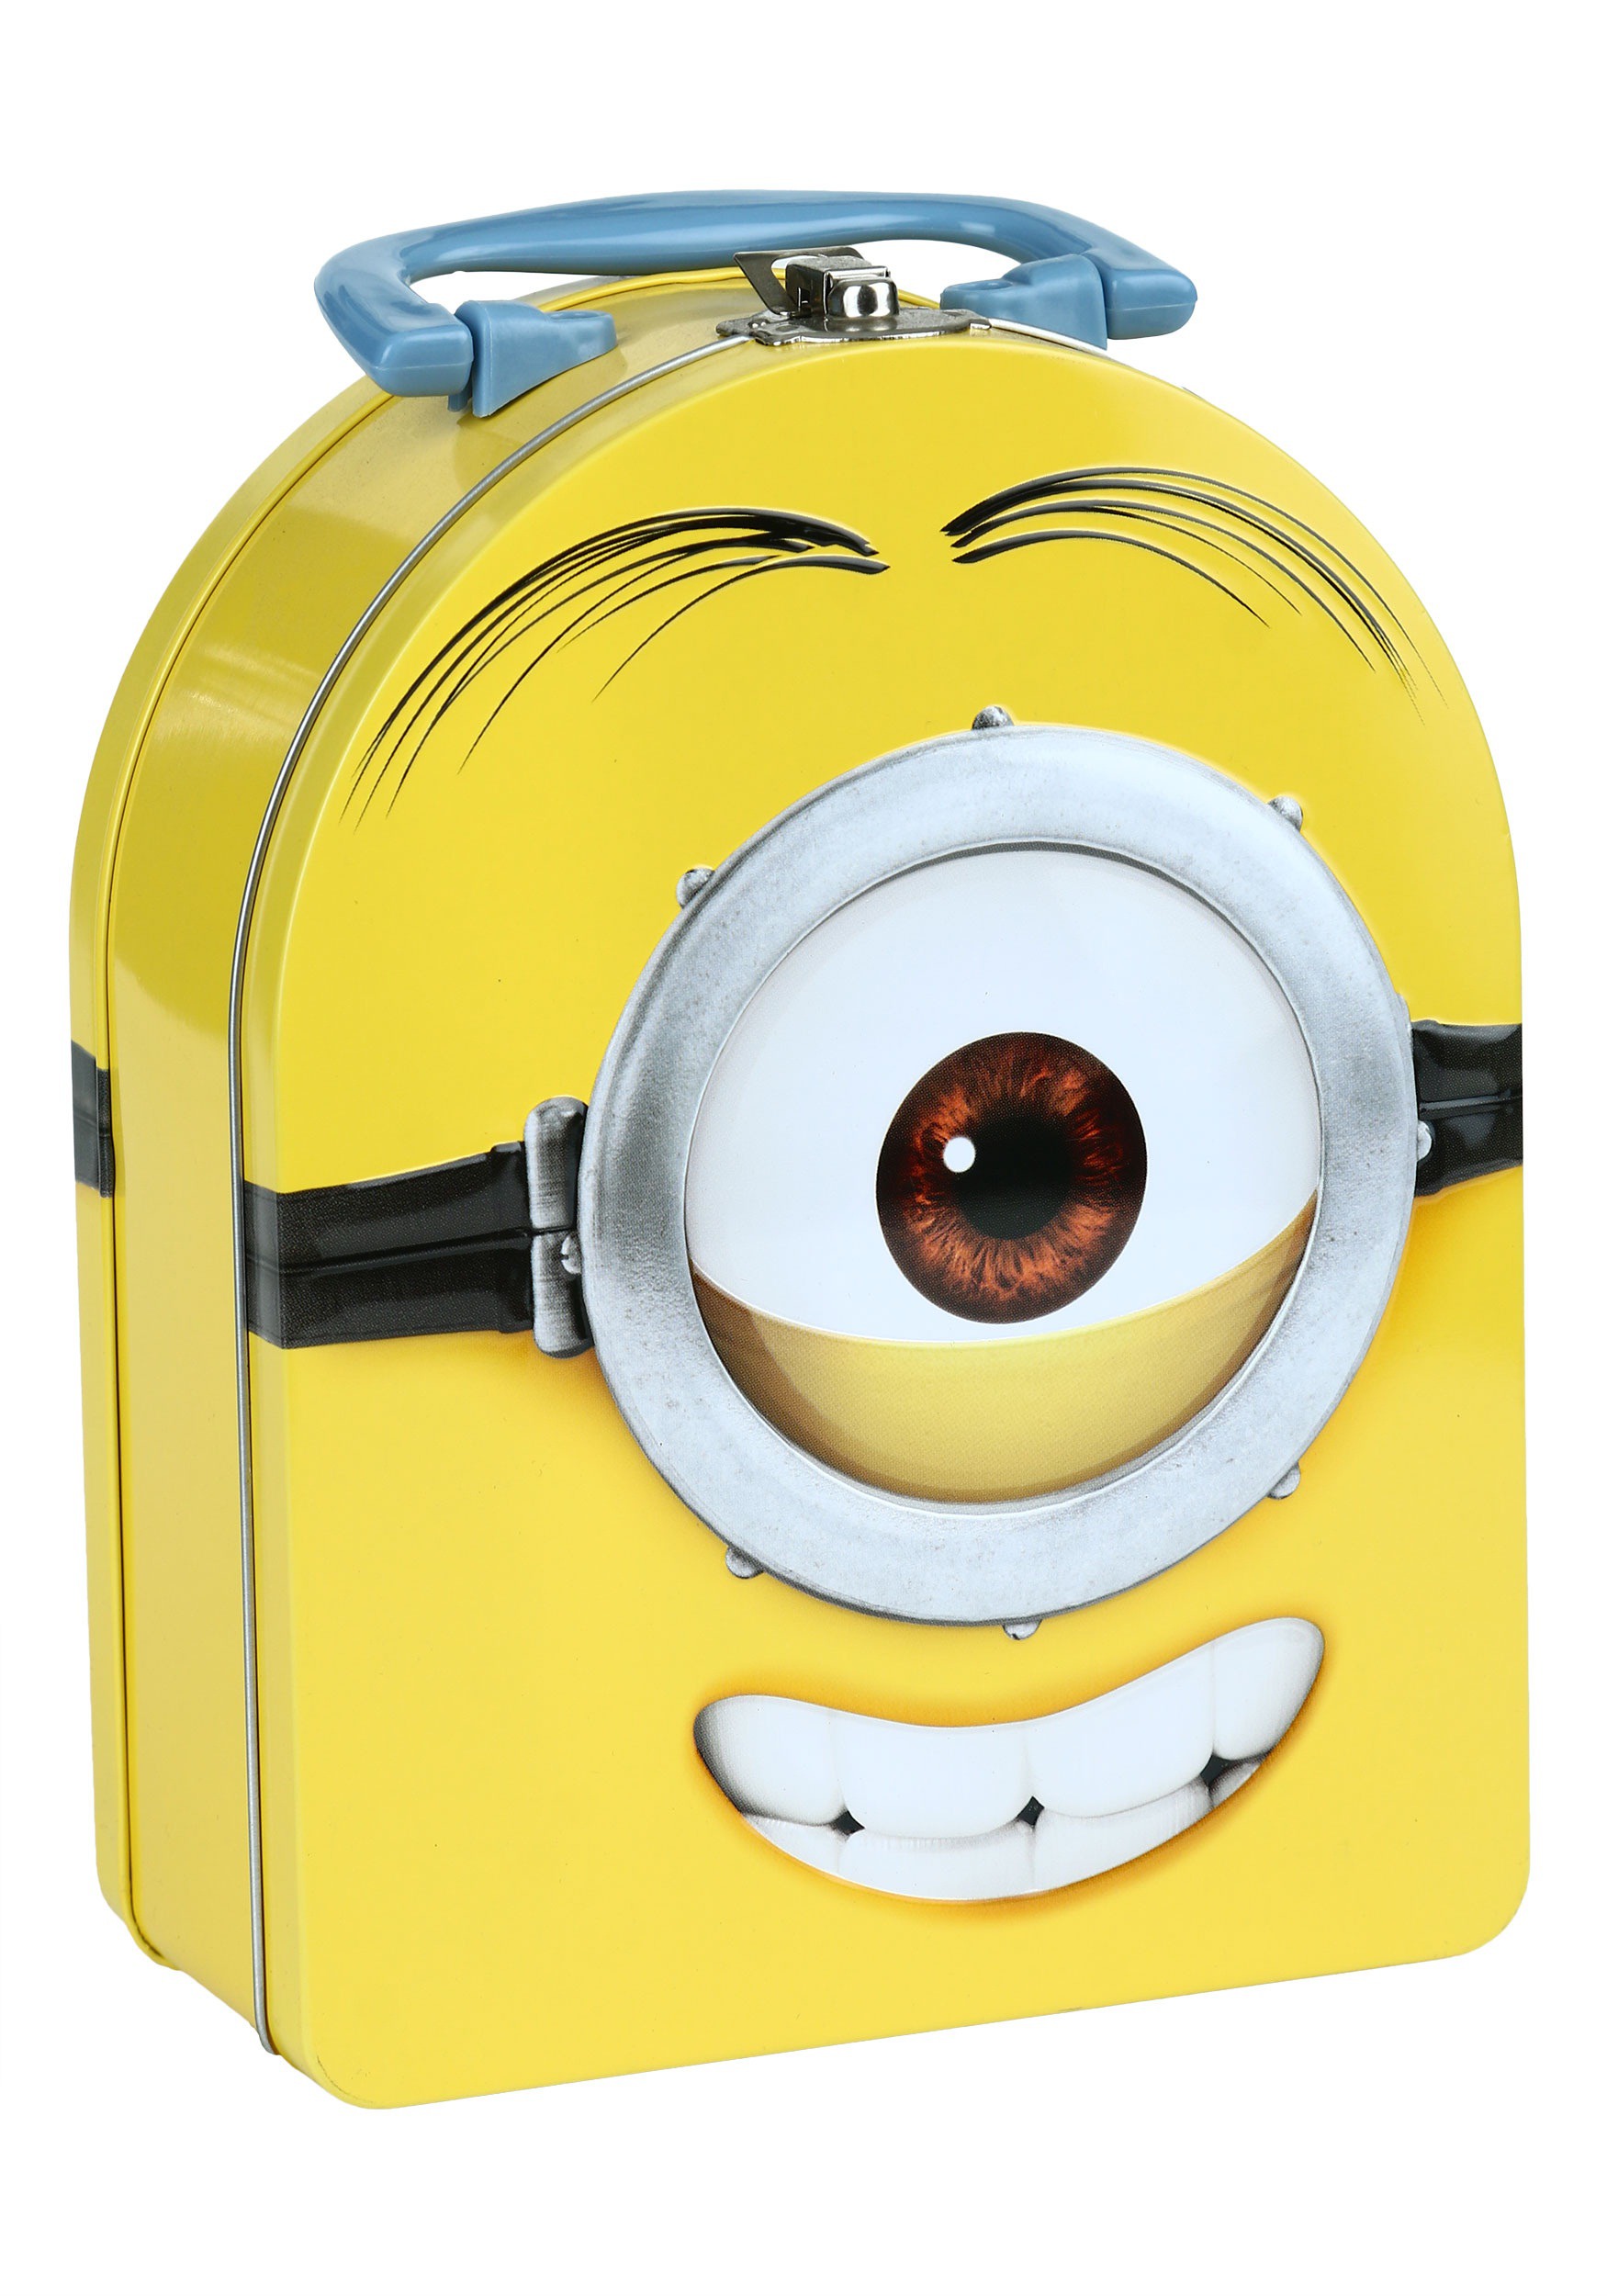 https://images.fun.com/products/30084/1-1/minions-one-eyed-lunch-box.jpg